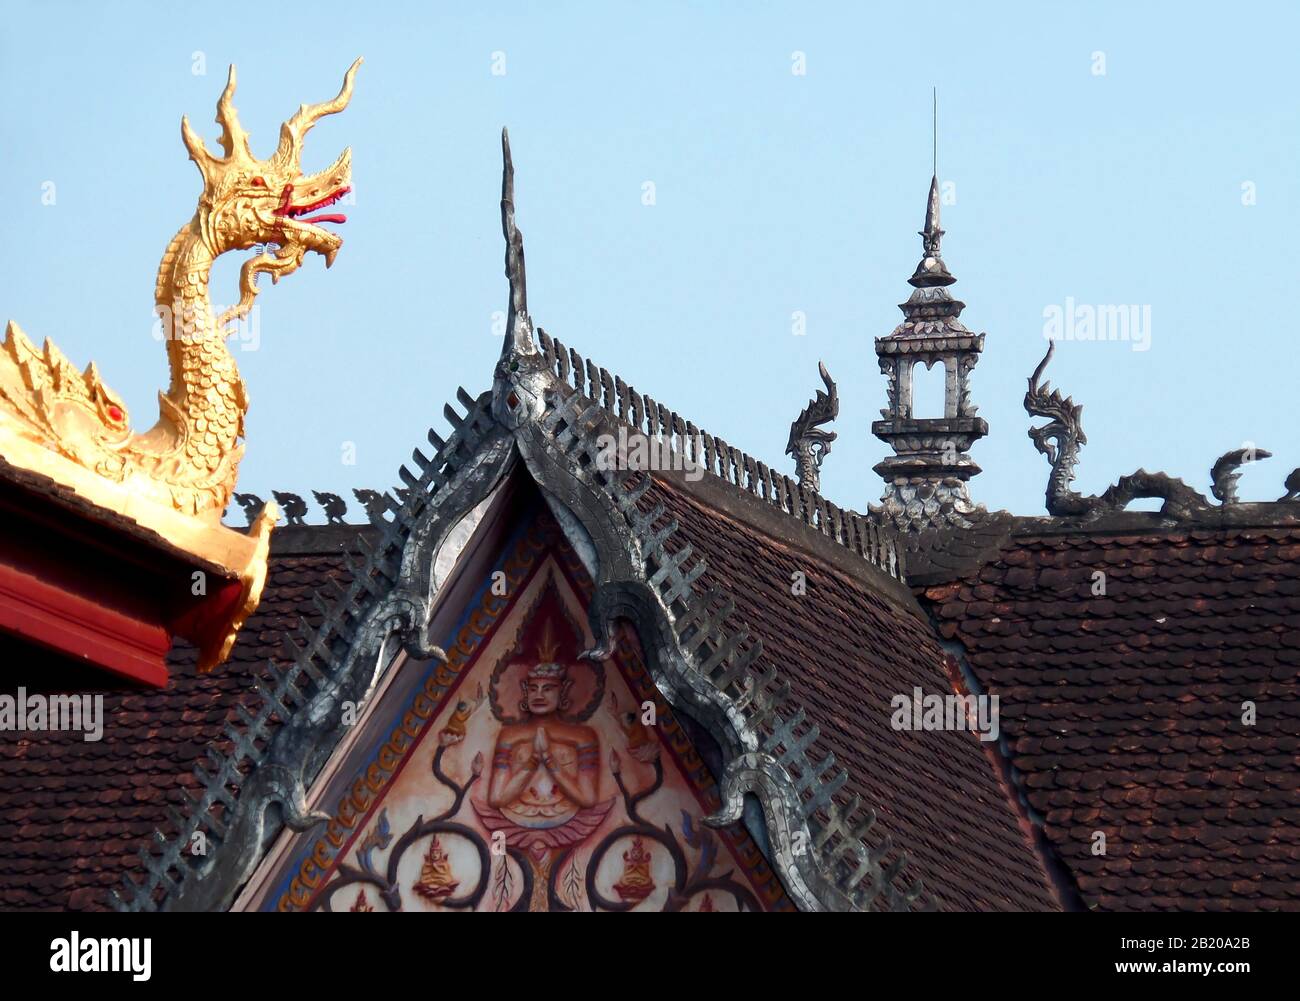 Gorgeous Old Roof with Naga Sculptures of Wat Si Saket Buddhist Temple in Vientiane, Laos Stock Photo